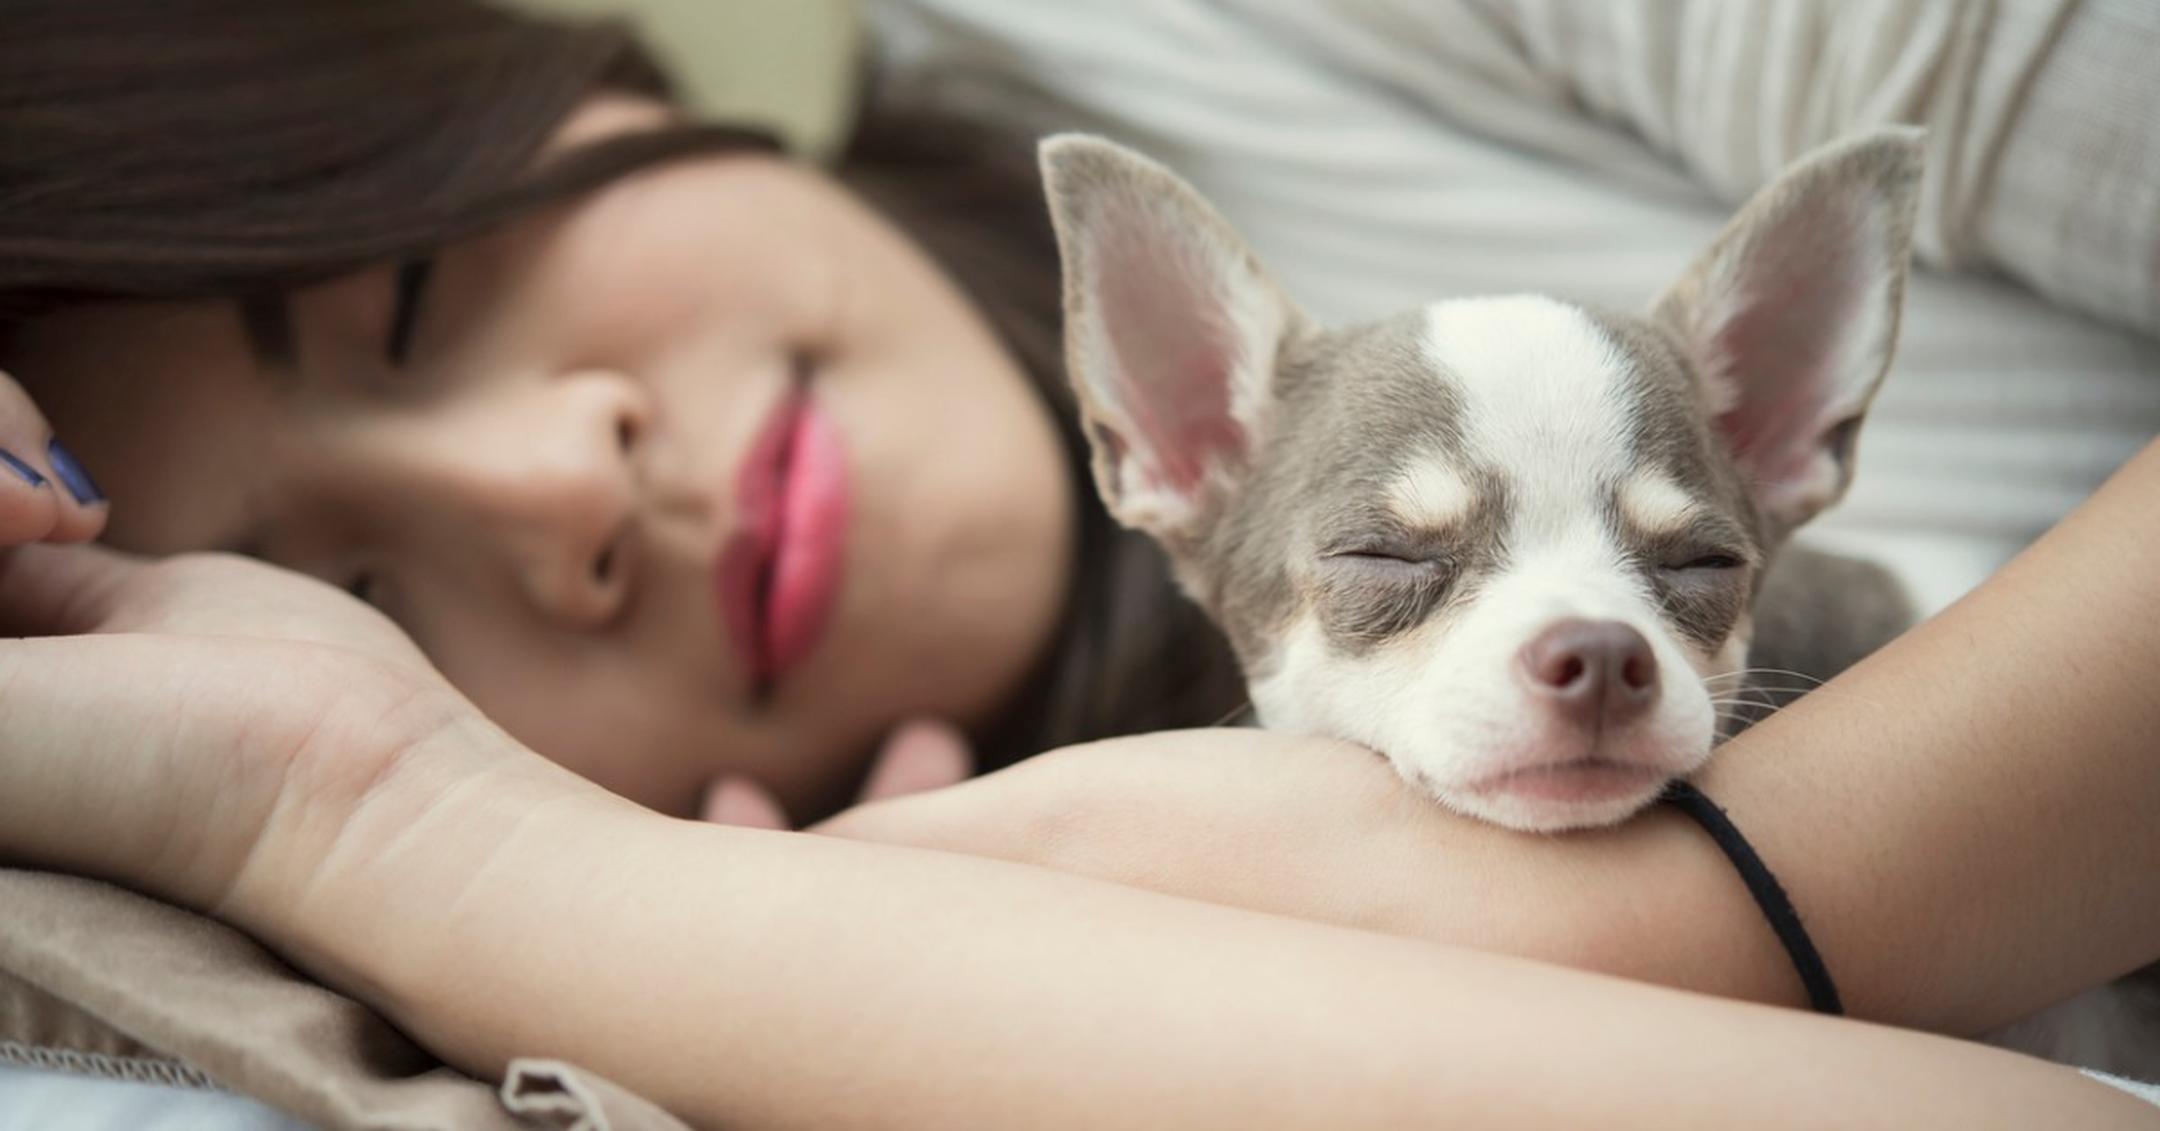 Ralaxation Concept Beautiful Woman Sleeping With Her Cute Dog On Bed Picture Id1062402658 1555682501439 مجلة نقطة العلمية